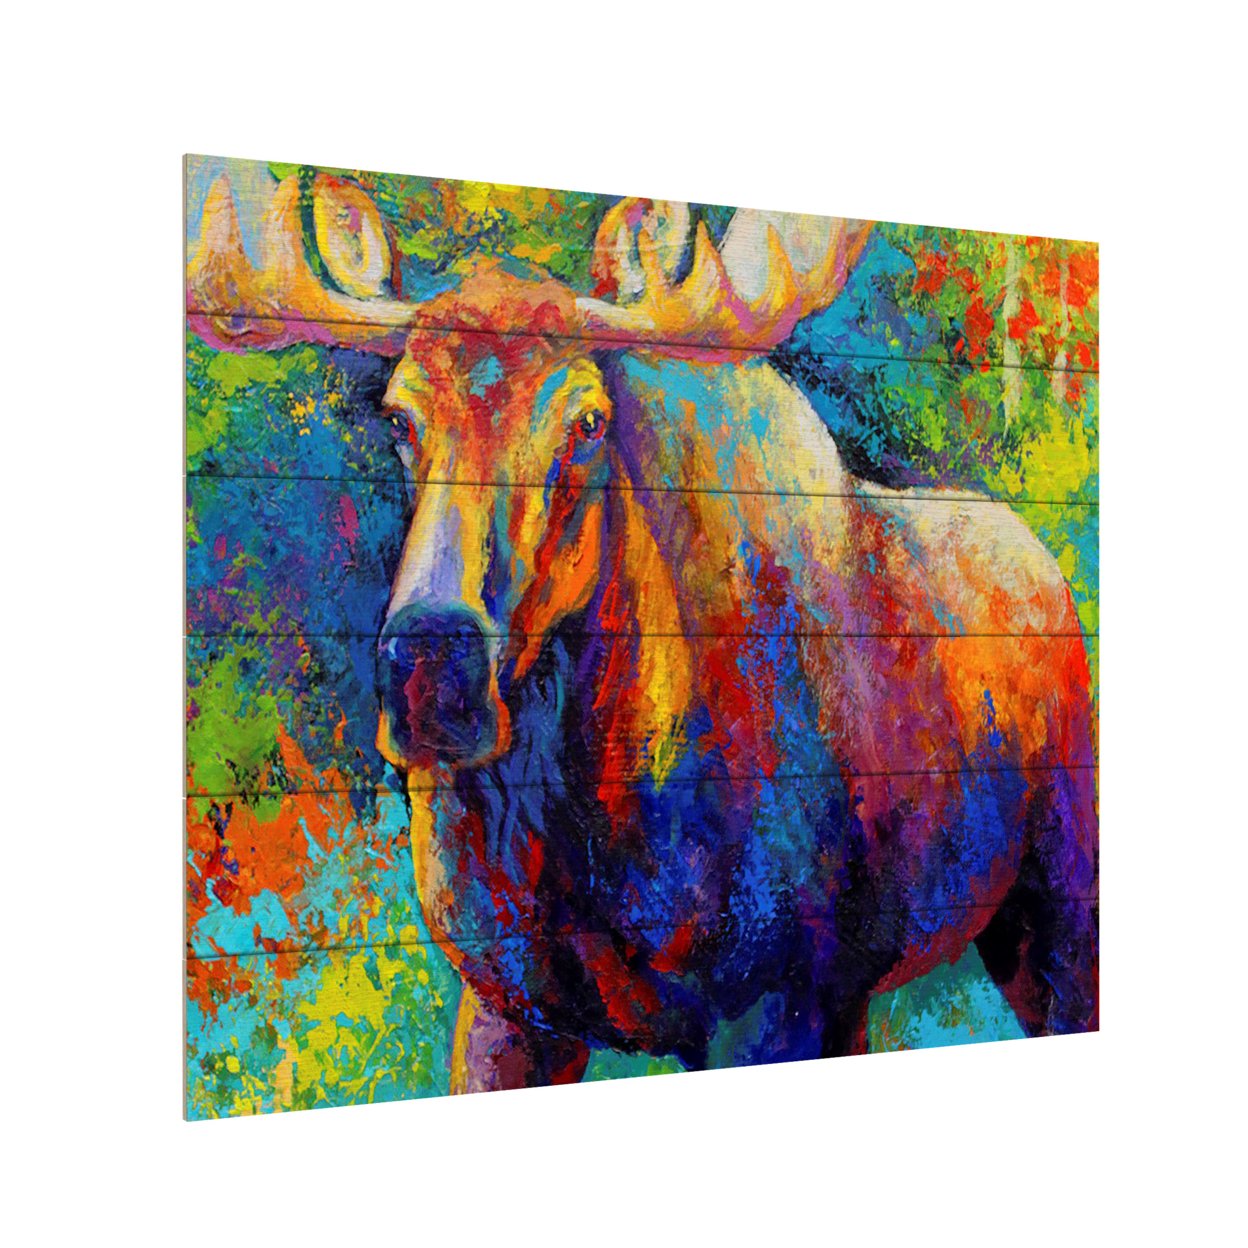 Wooden Slat Art 18 X 22 Inches Titled Bull Moose Ready To Hang Home Decor Picture